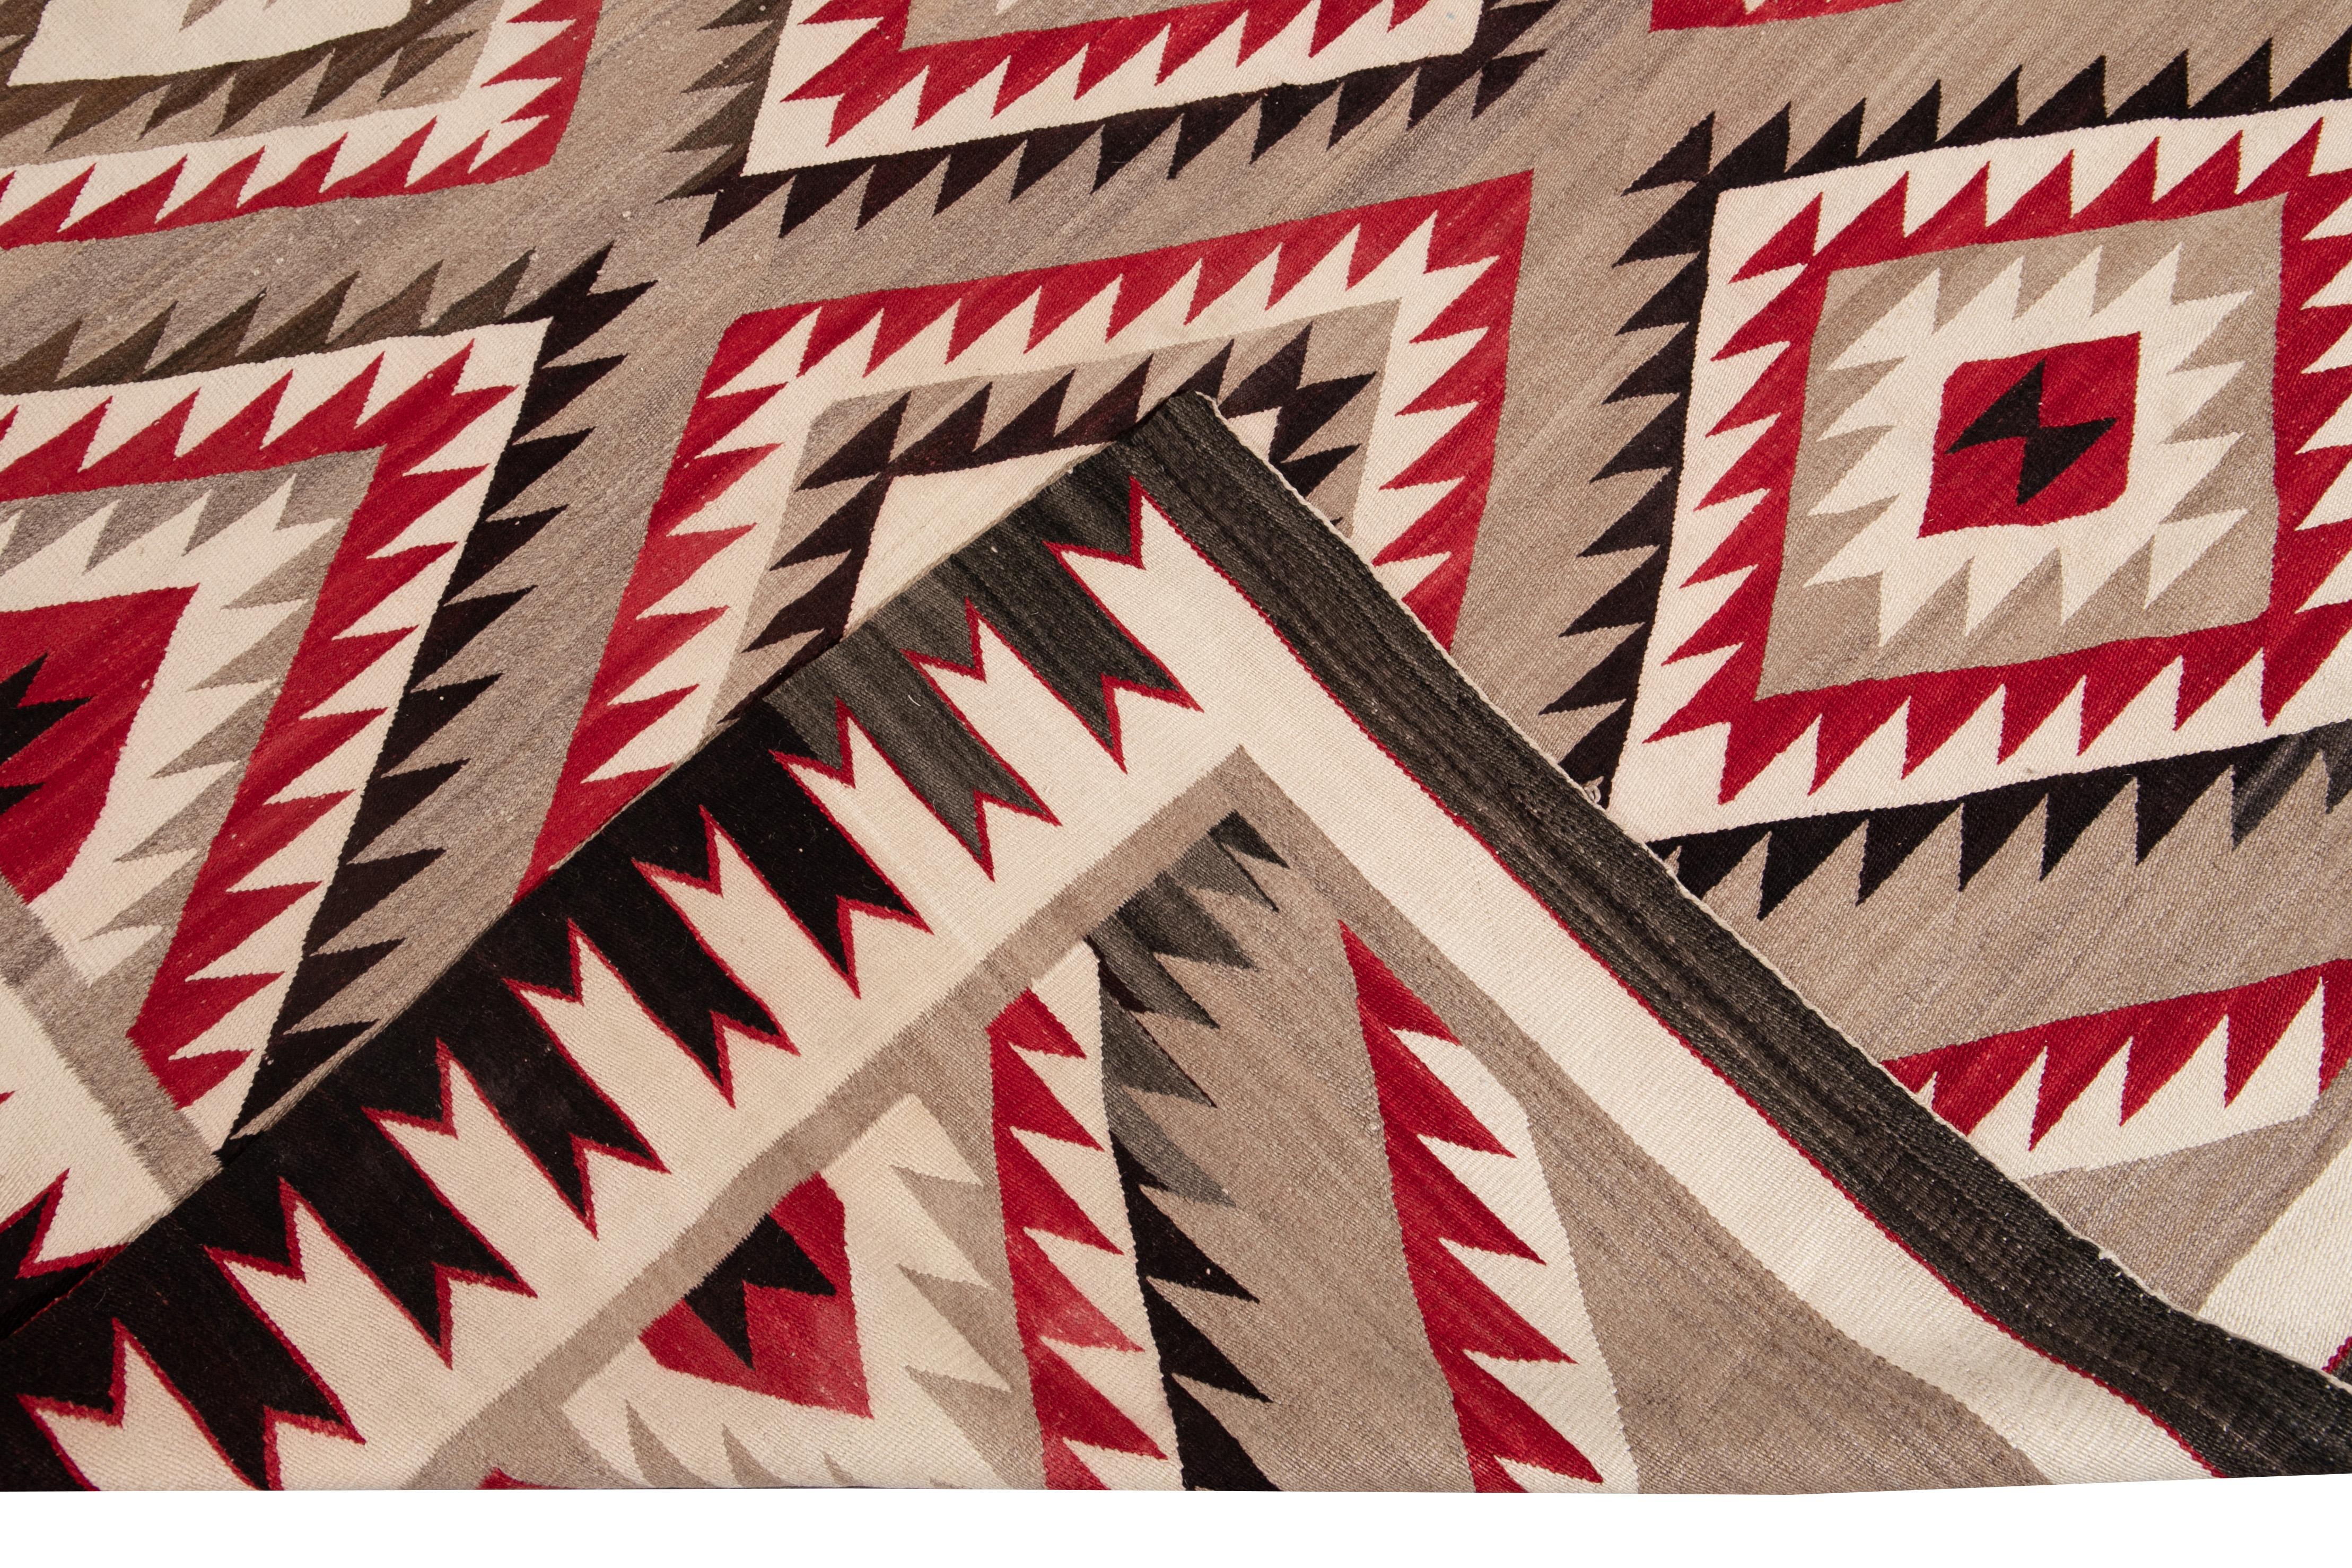 American antique Navajo geometric Folk Navajo flat-weave wool rug tan field. This Navajo rug has ivory, brown, and red accents in a gorgeous all-over geometric design.

This rug measures: 7'11